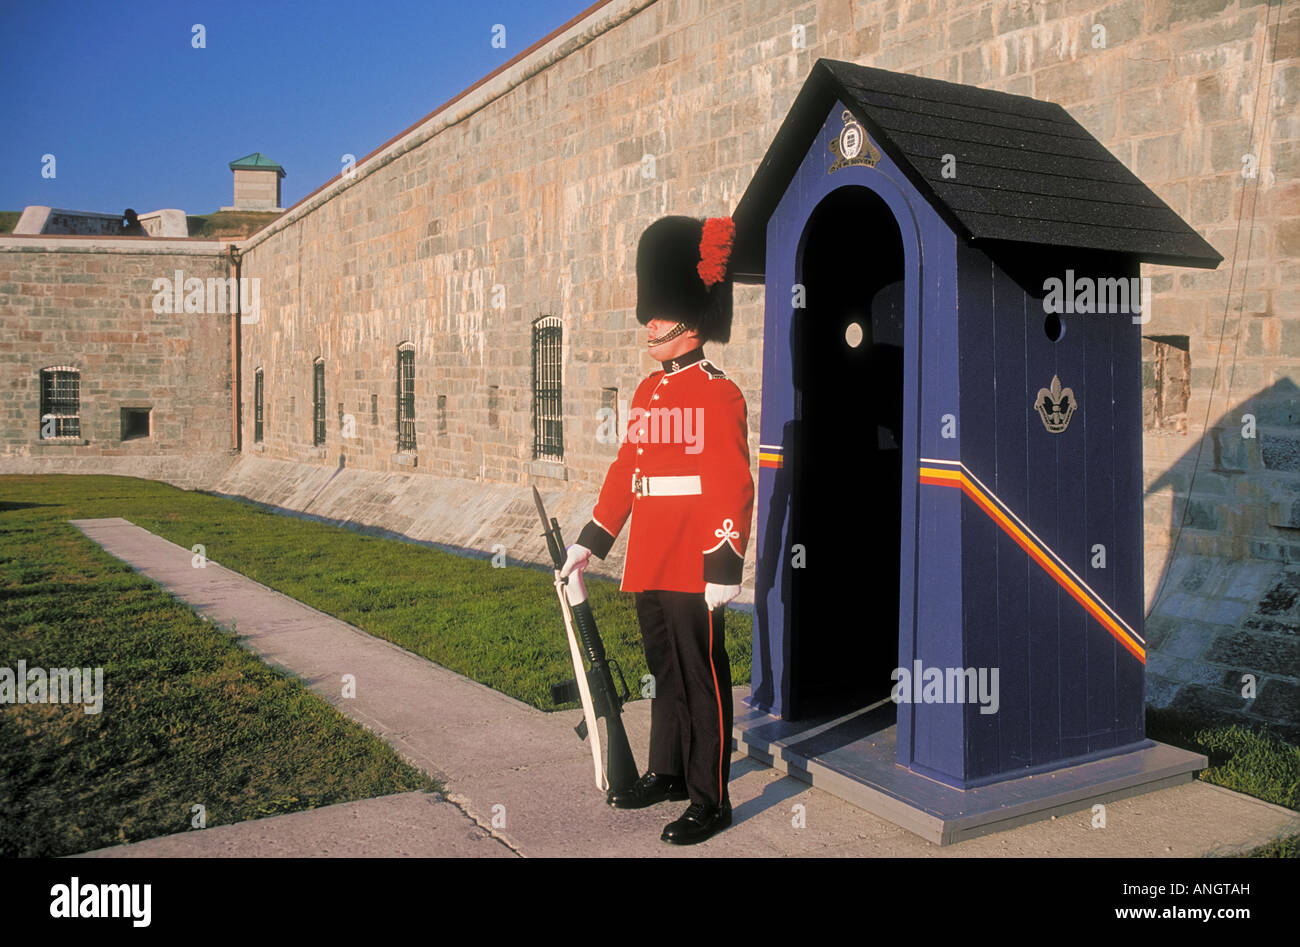 An honor guard from the Royal 22nd Regiment of the Canadian Forces stands on duty in traditional uniform outside The Citadel of Stock Photo